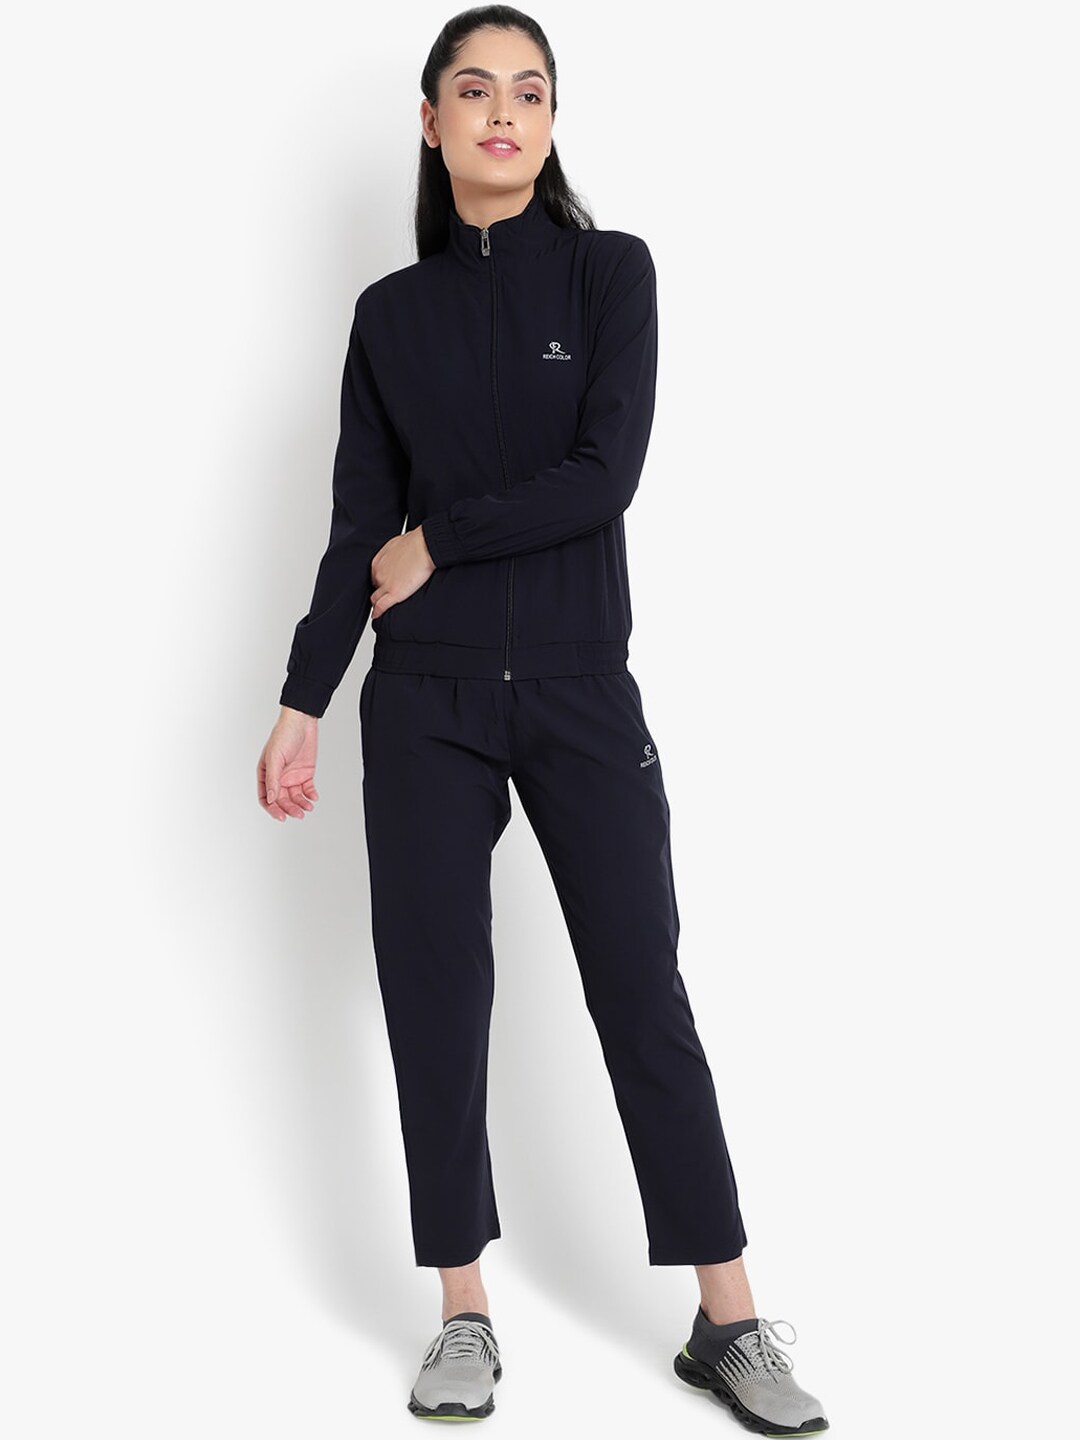 Reich Color Women Navy Blue Solid Slim Fit Track Suit Price in India